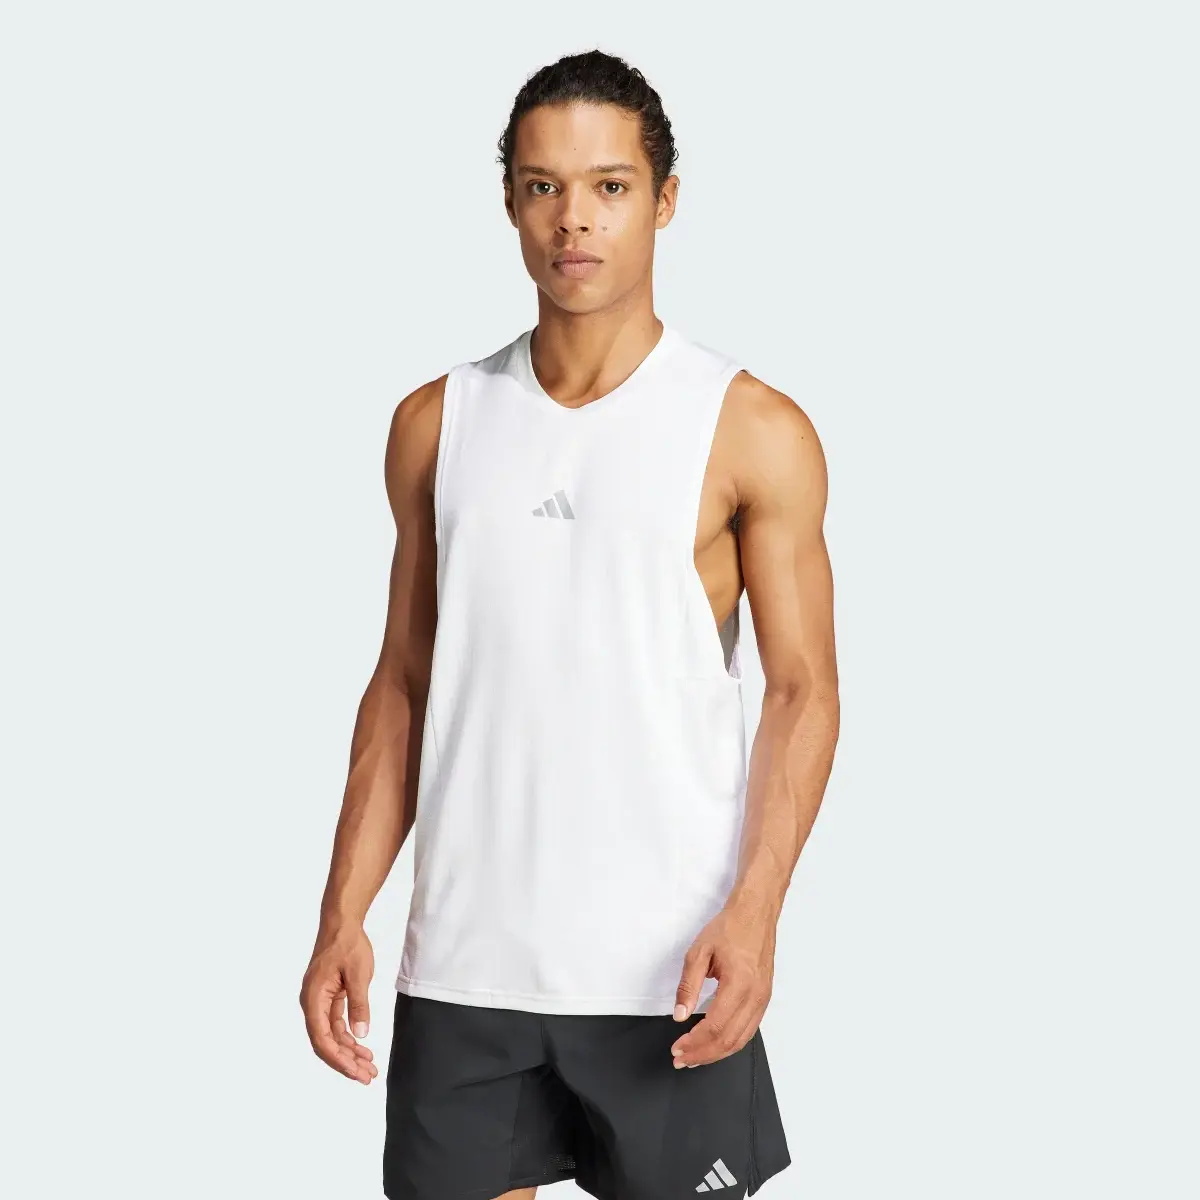 Adidas Designed for Training Workout HEAT.RDY Tank Top. 2